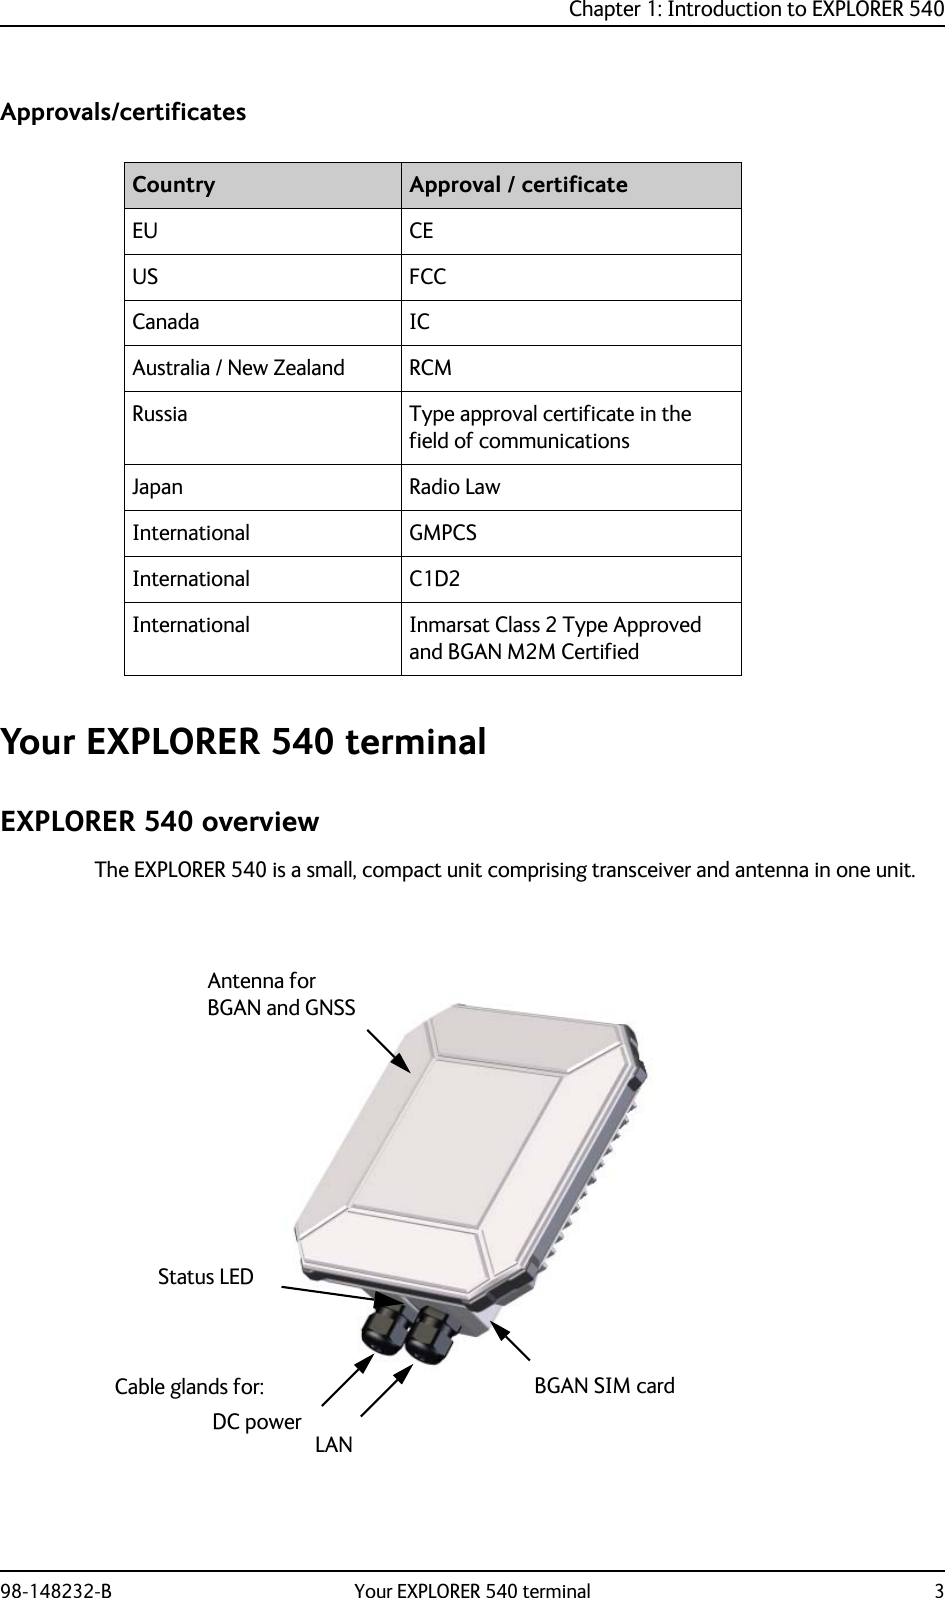 Chapter 1: Introduction to EXPLORER 54098-148232-B Your EXPLORER 540 terminal 3Approvals/certificatesYour EXPLORER 540 terminalEXPLORER 540 overviewThe EXPLORER 540 is a small, compact unit comprising transceiver and antenna in one unit.Country Approval / certificateEU CEUS FCCCanada ICAustralia / New Zealand RCMRussia Type approval certificate in the field of communicationsJapan Radio LawInternational GMPCSInternational C1D2International Inmarsat Class 2 Type Approved and BGAN M2M CertifiedAntenna for BGAN and GNSSLANBGAN SIM cardStatus LEDDC powerCable glands for: